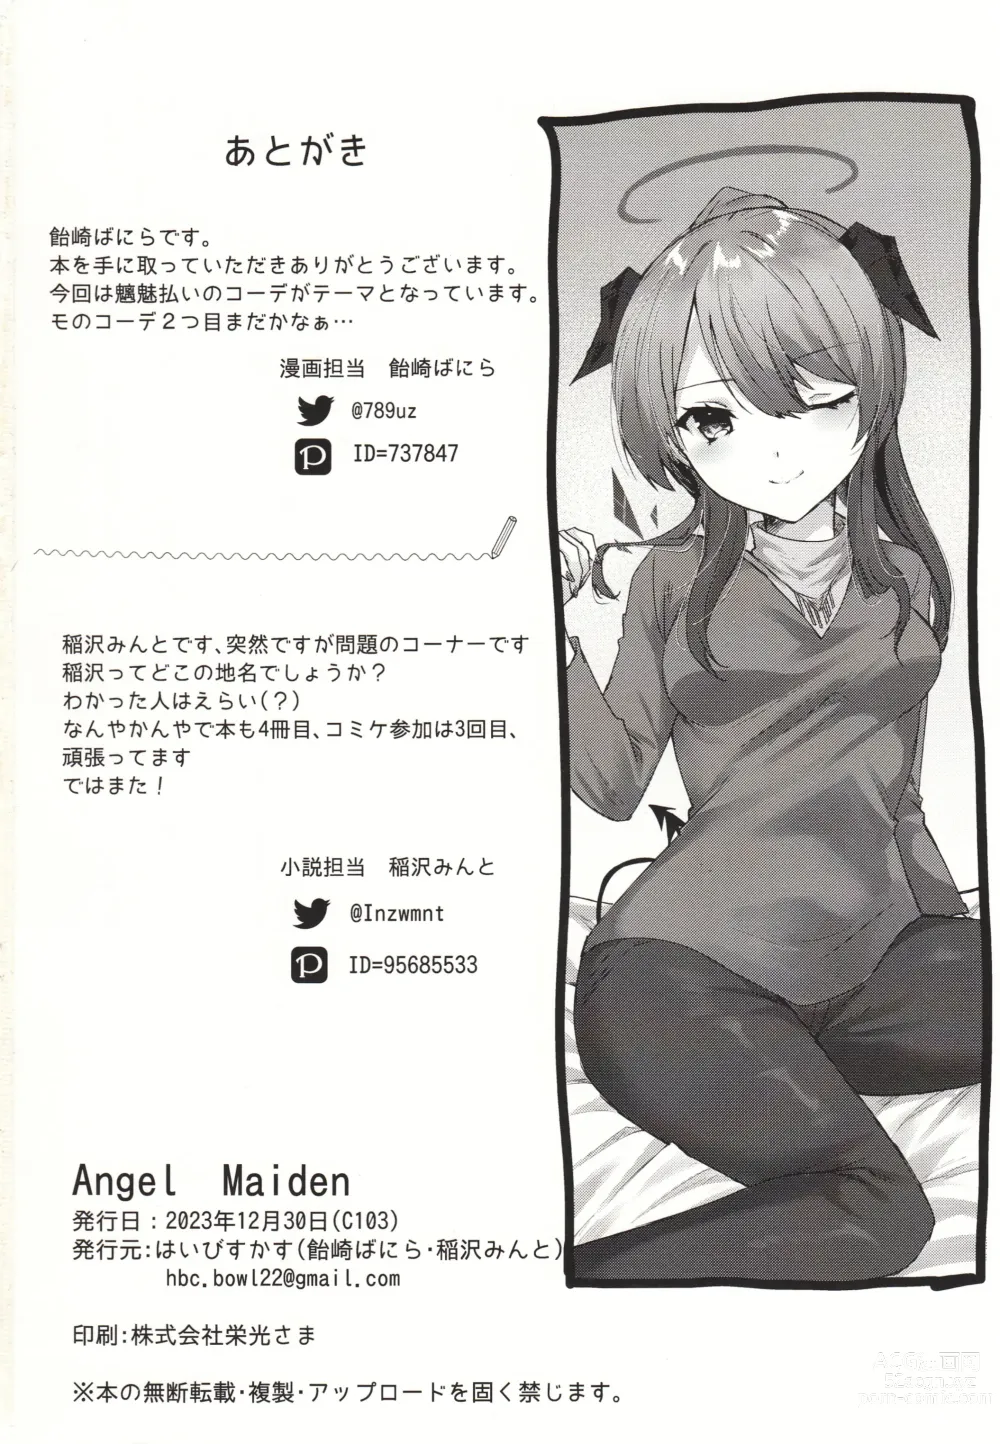 Page 35 of doujinshi Angel Maiden